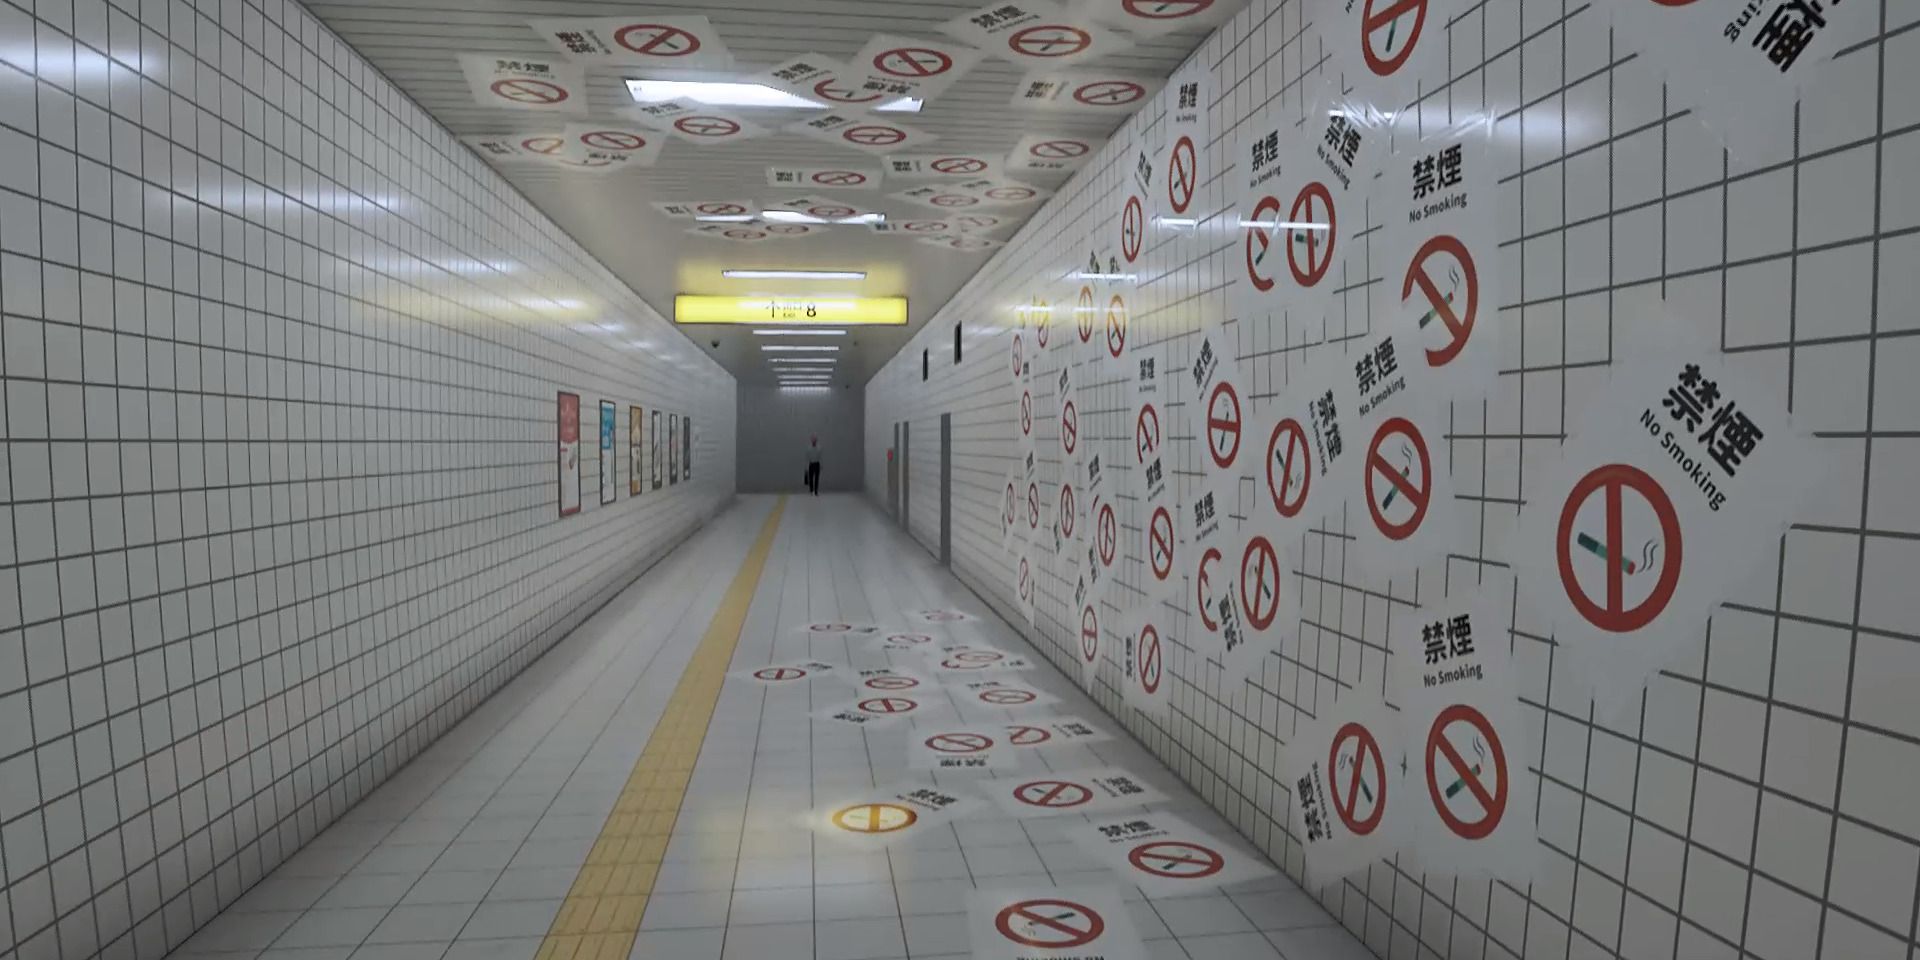 Image of a ton of No Smoking posters in The Exit 8